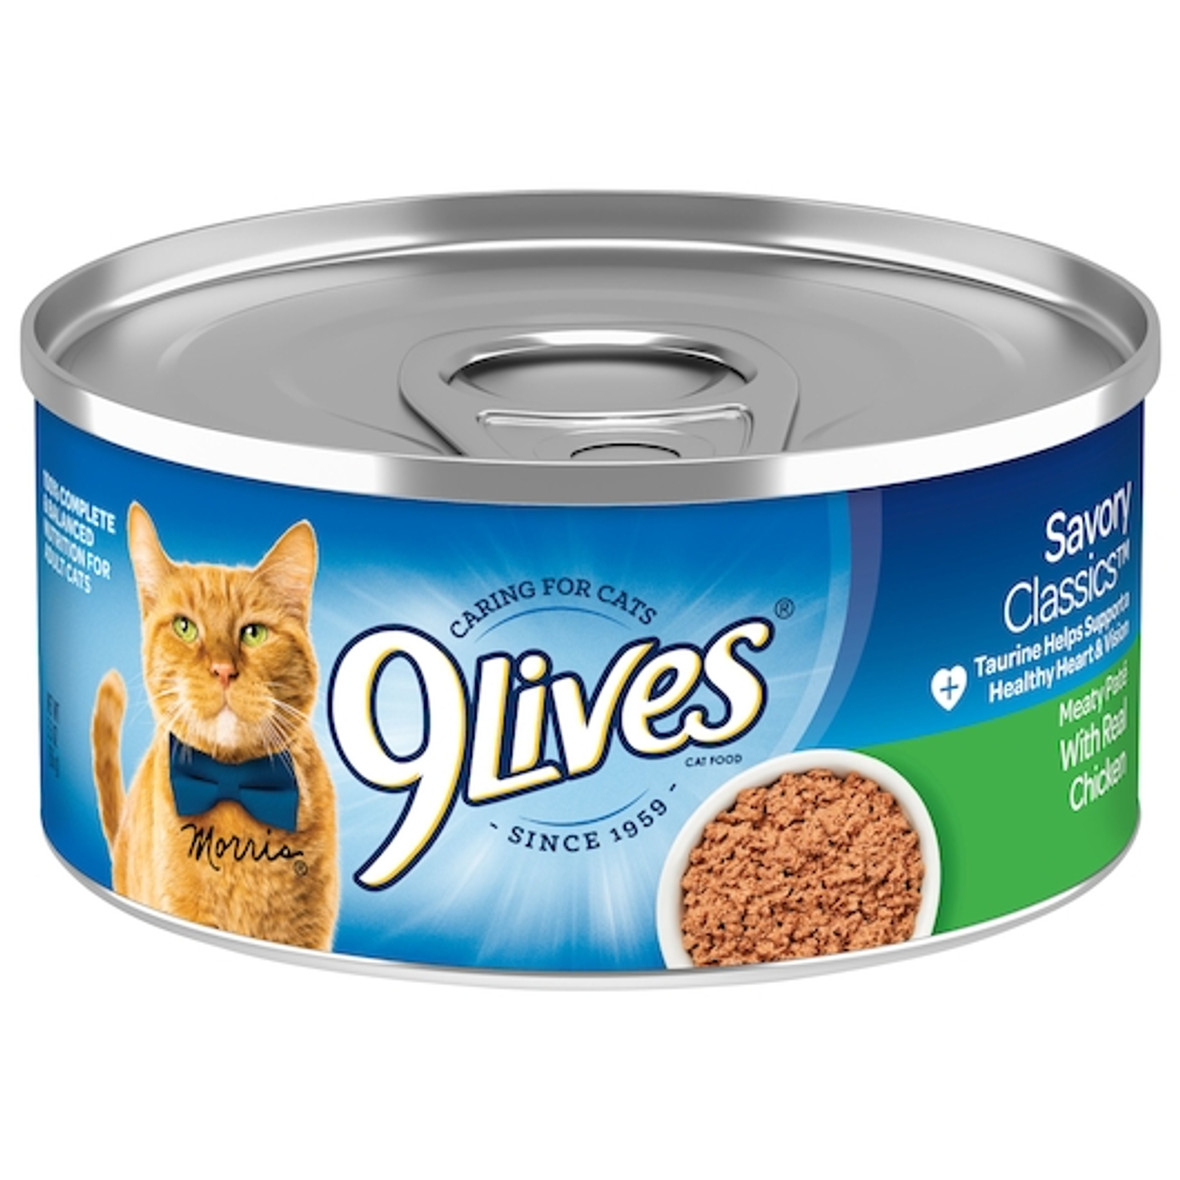 9 Lives Meaty Pate Chicken Dinner Cat Food Singles, 5.5 Ounces, 24 Per Case